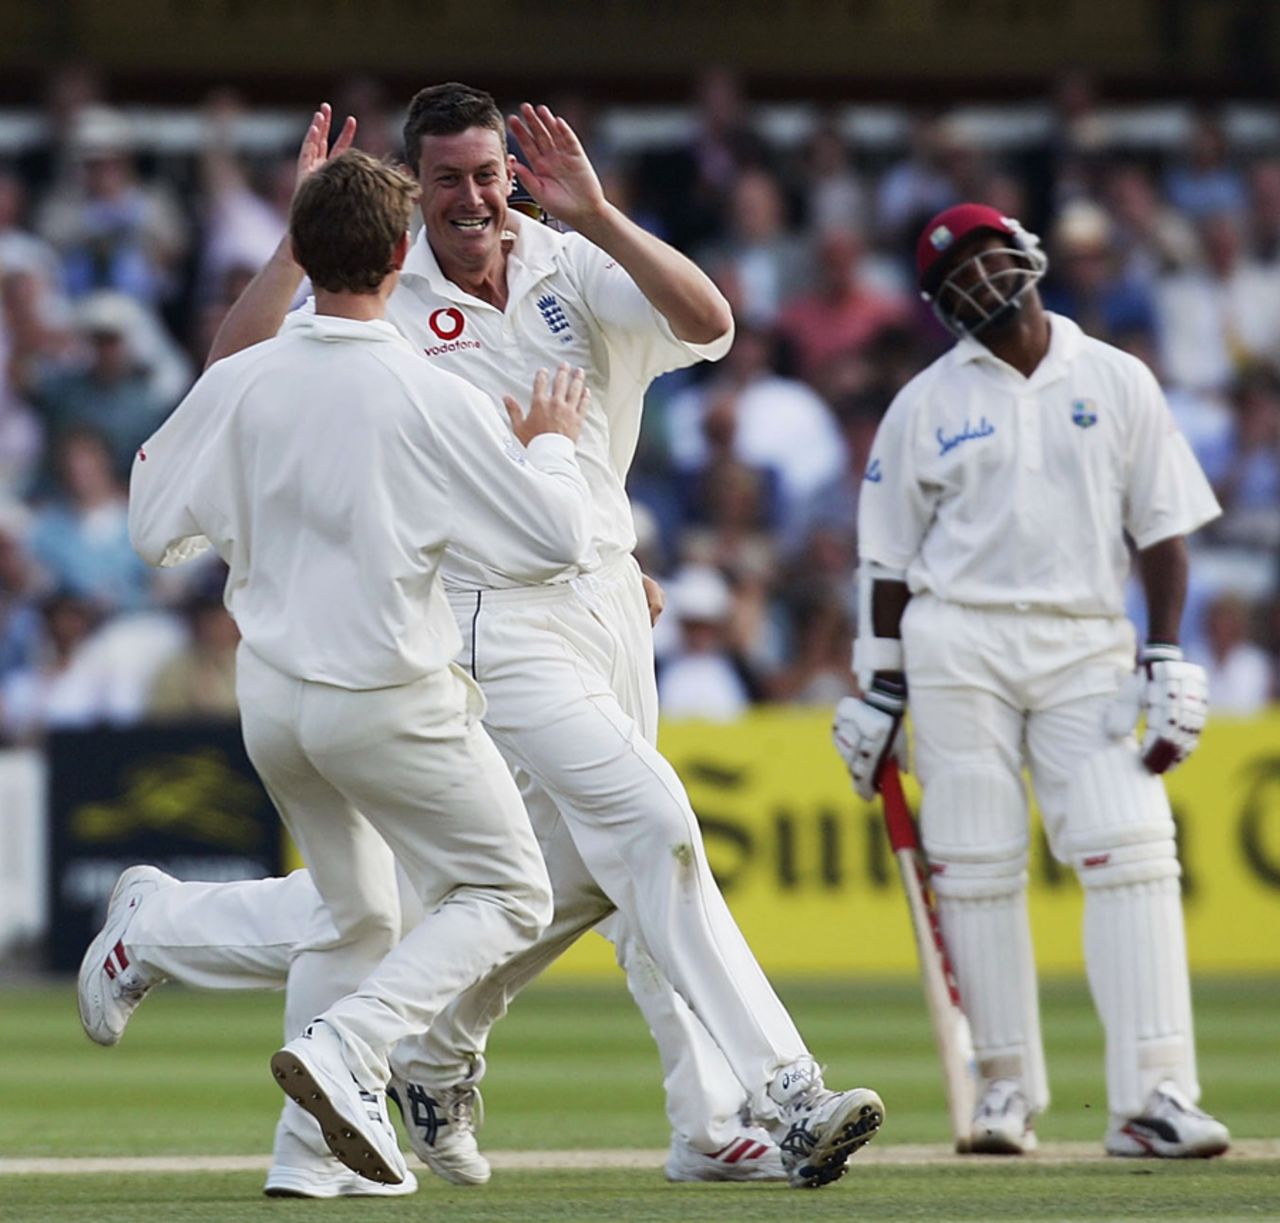 Ashley Giles celebrates as Brian Lara looks on disconsolately, England v West Indies, 1st Test, Lord's, 5th day, July 26, 2004